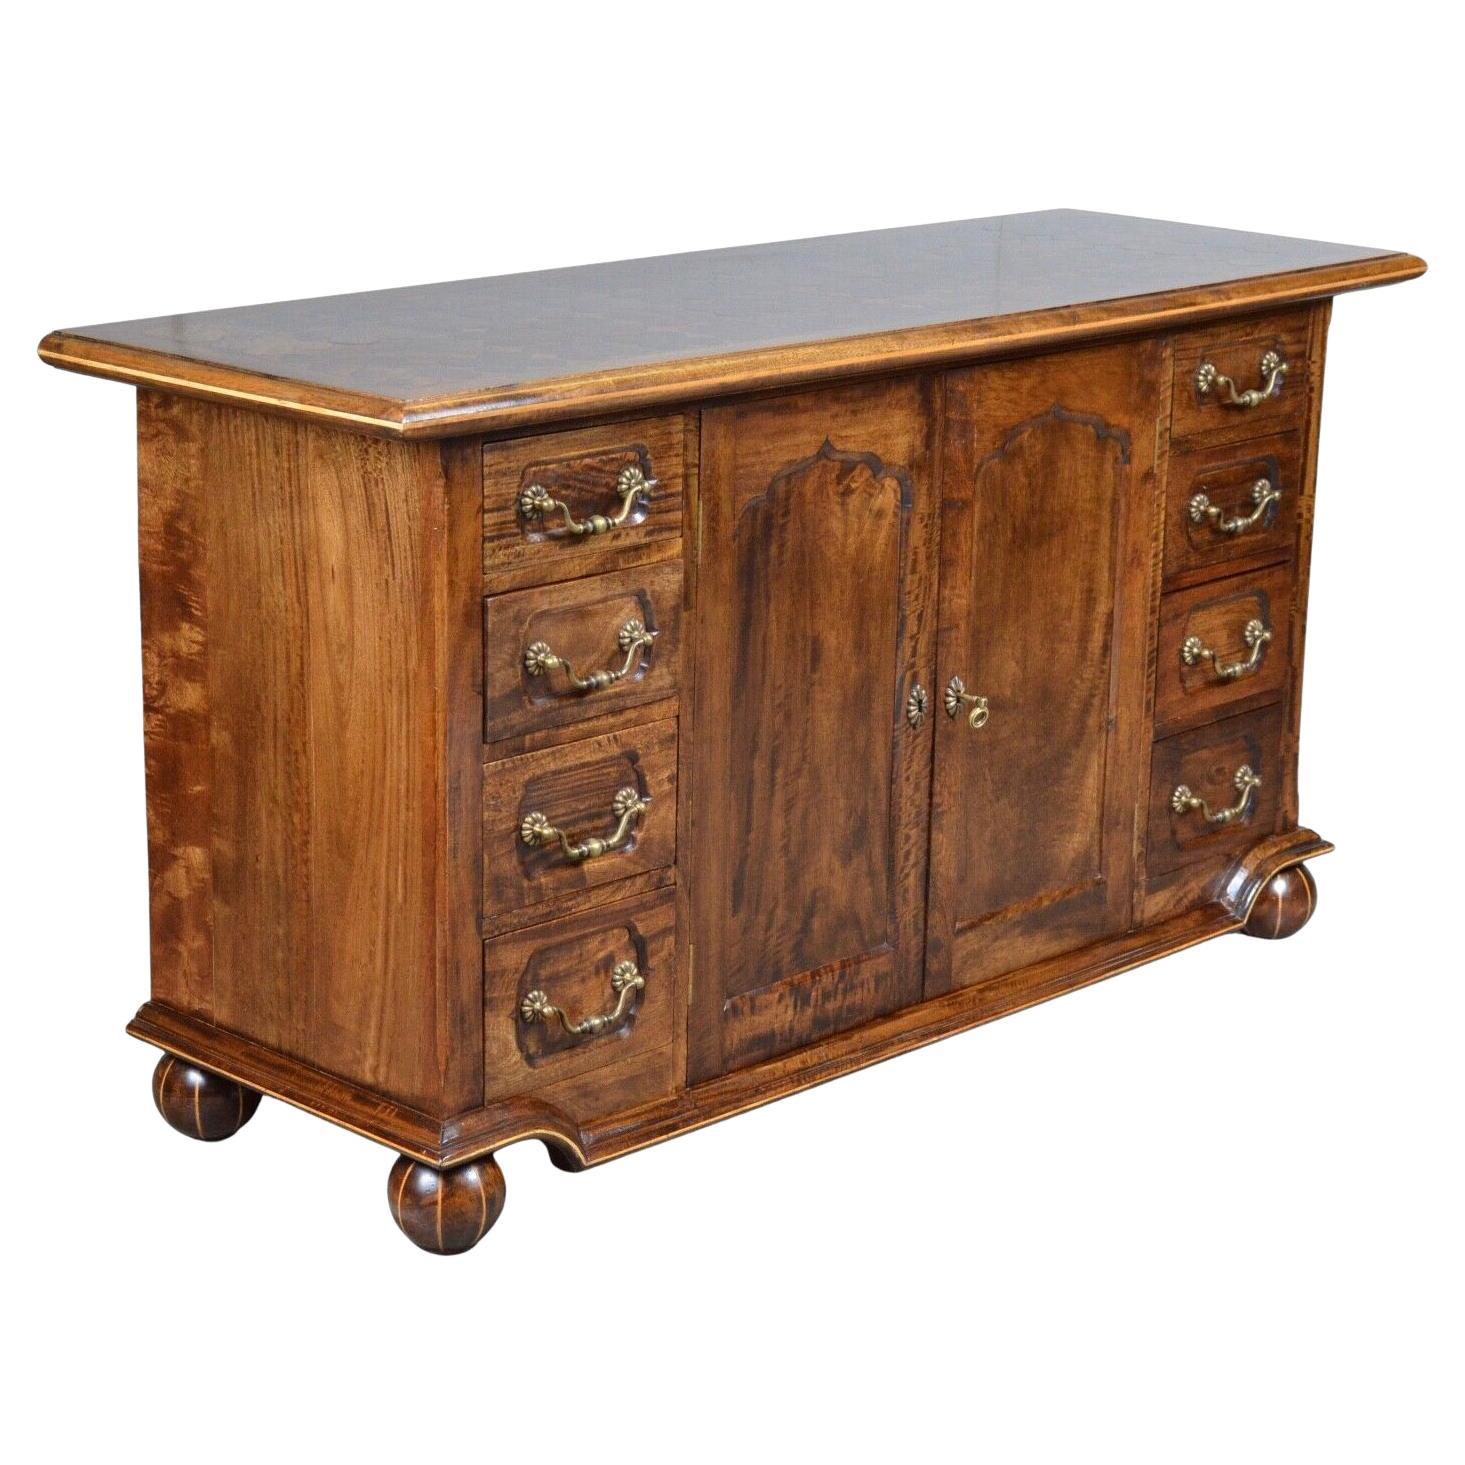 Quality Antique Walnut Parquetry Inlaid Hardwood Sideboard /Table&Ch Available For Sale